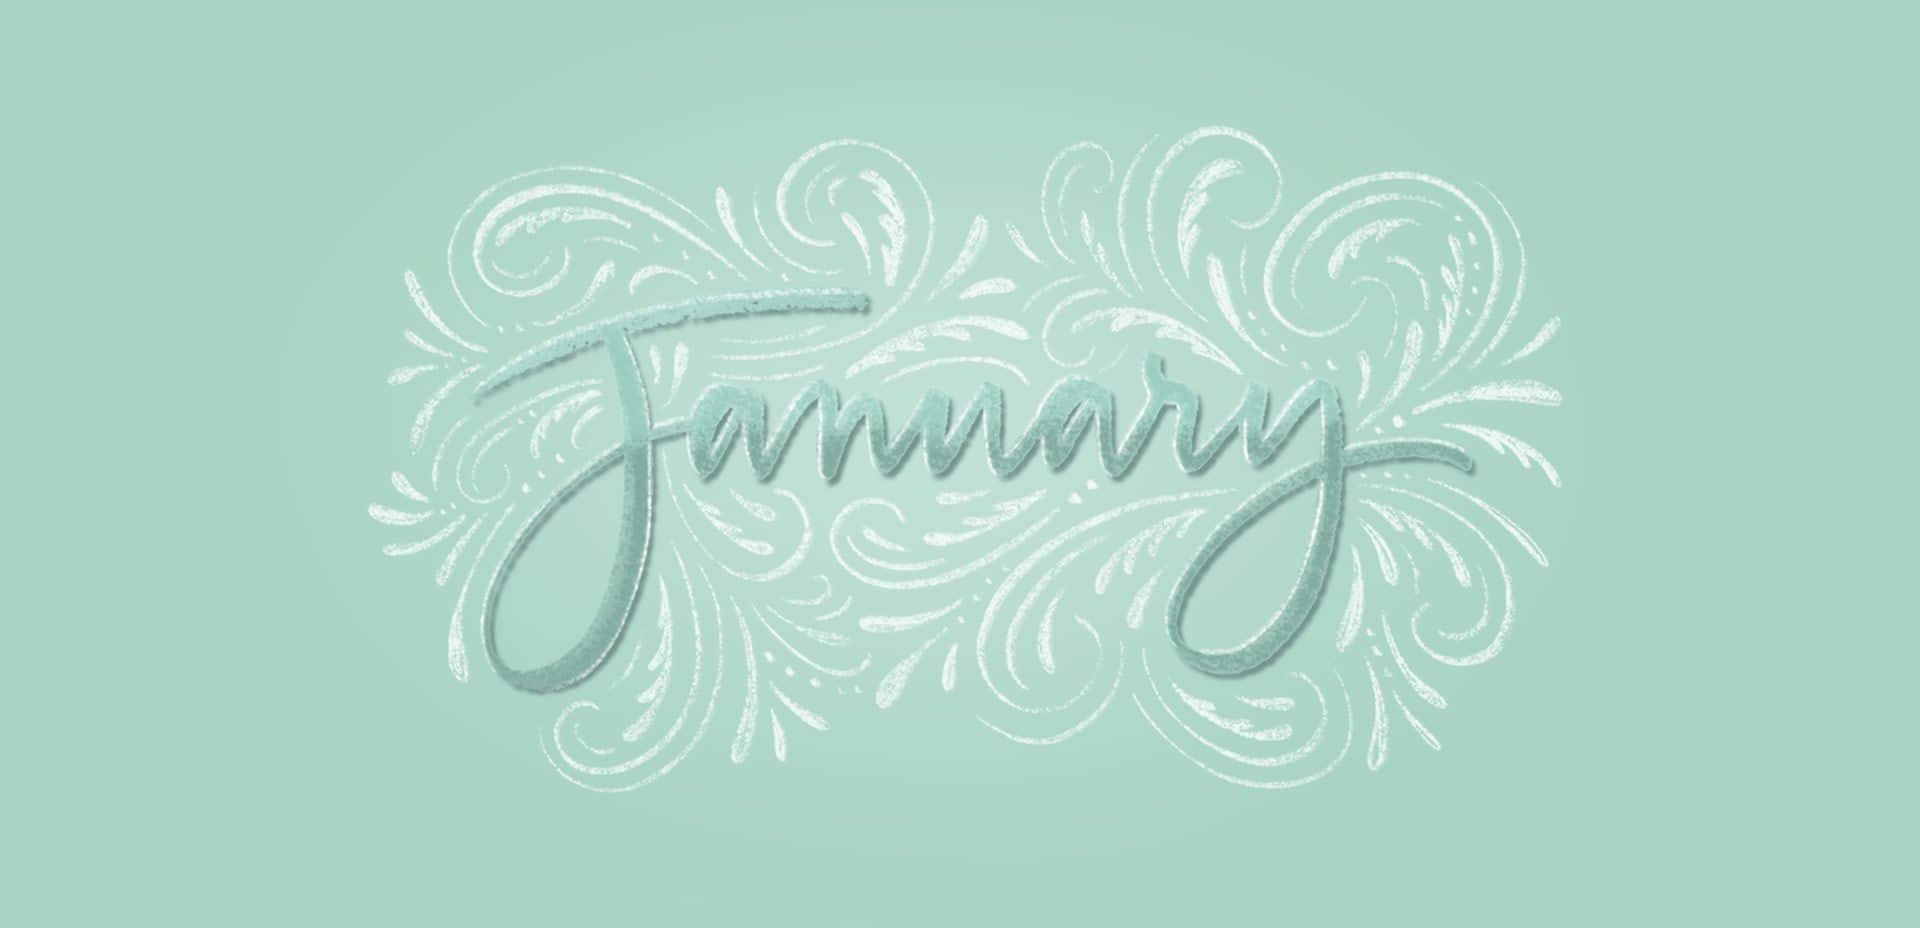 Download January's Beauty | Wallpapers.com